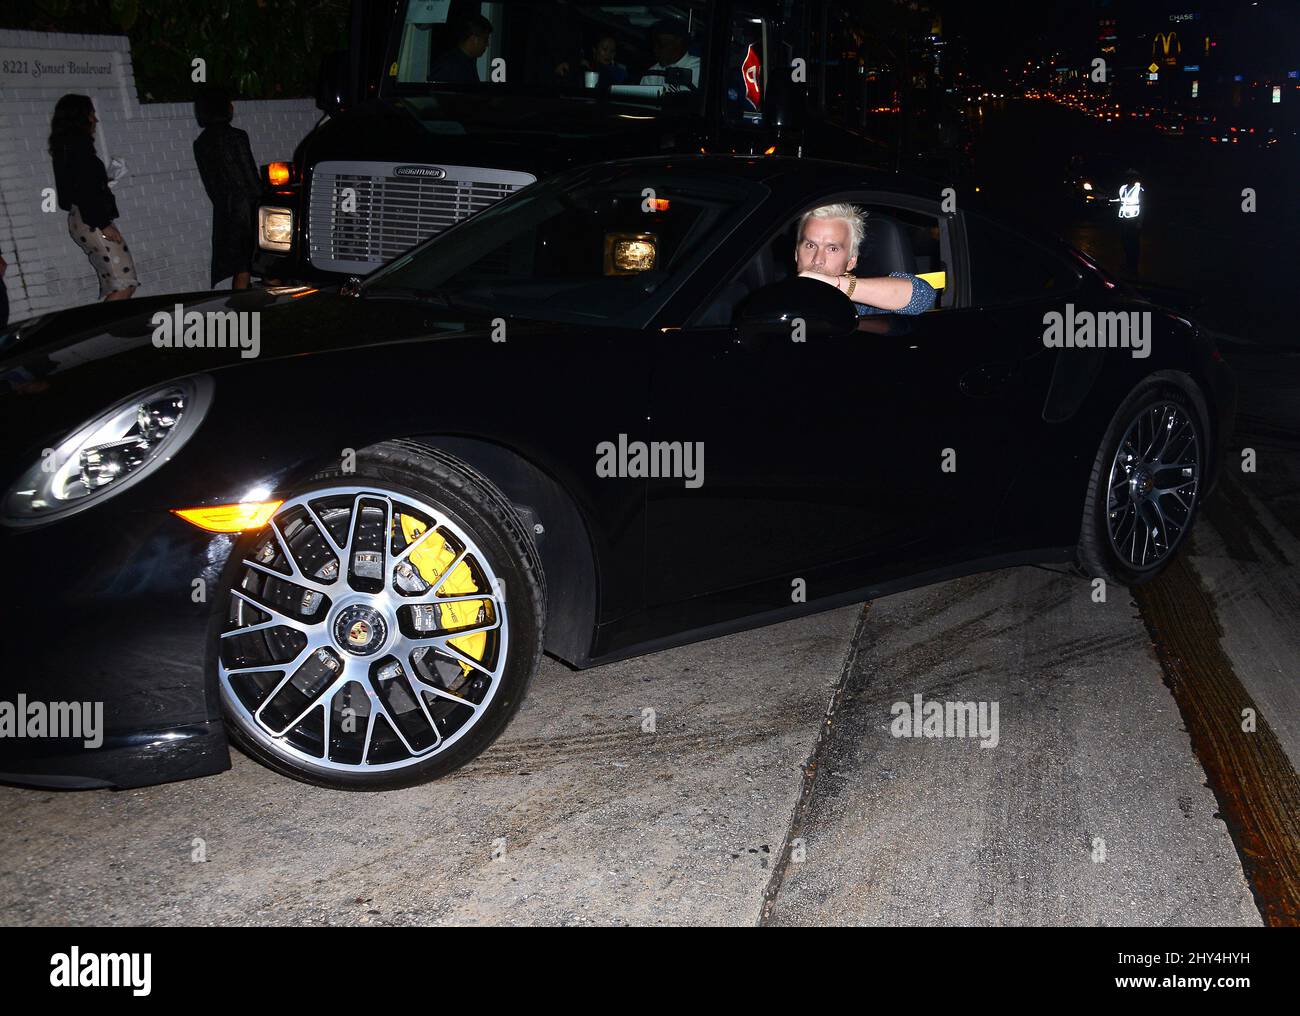 Baltazar Getty leaving the MaxMara Cocktail Party at Chateau Marmont Hotel Stock Photo